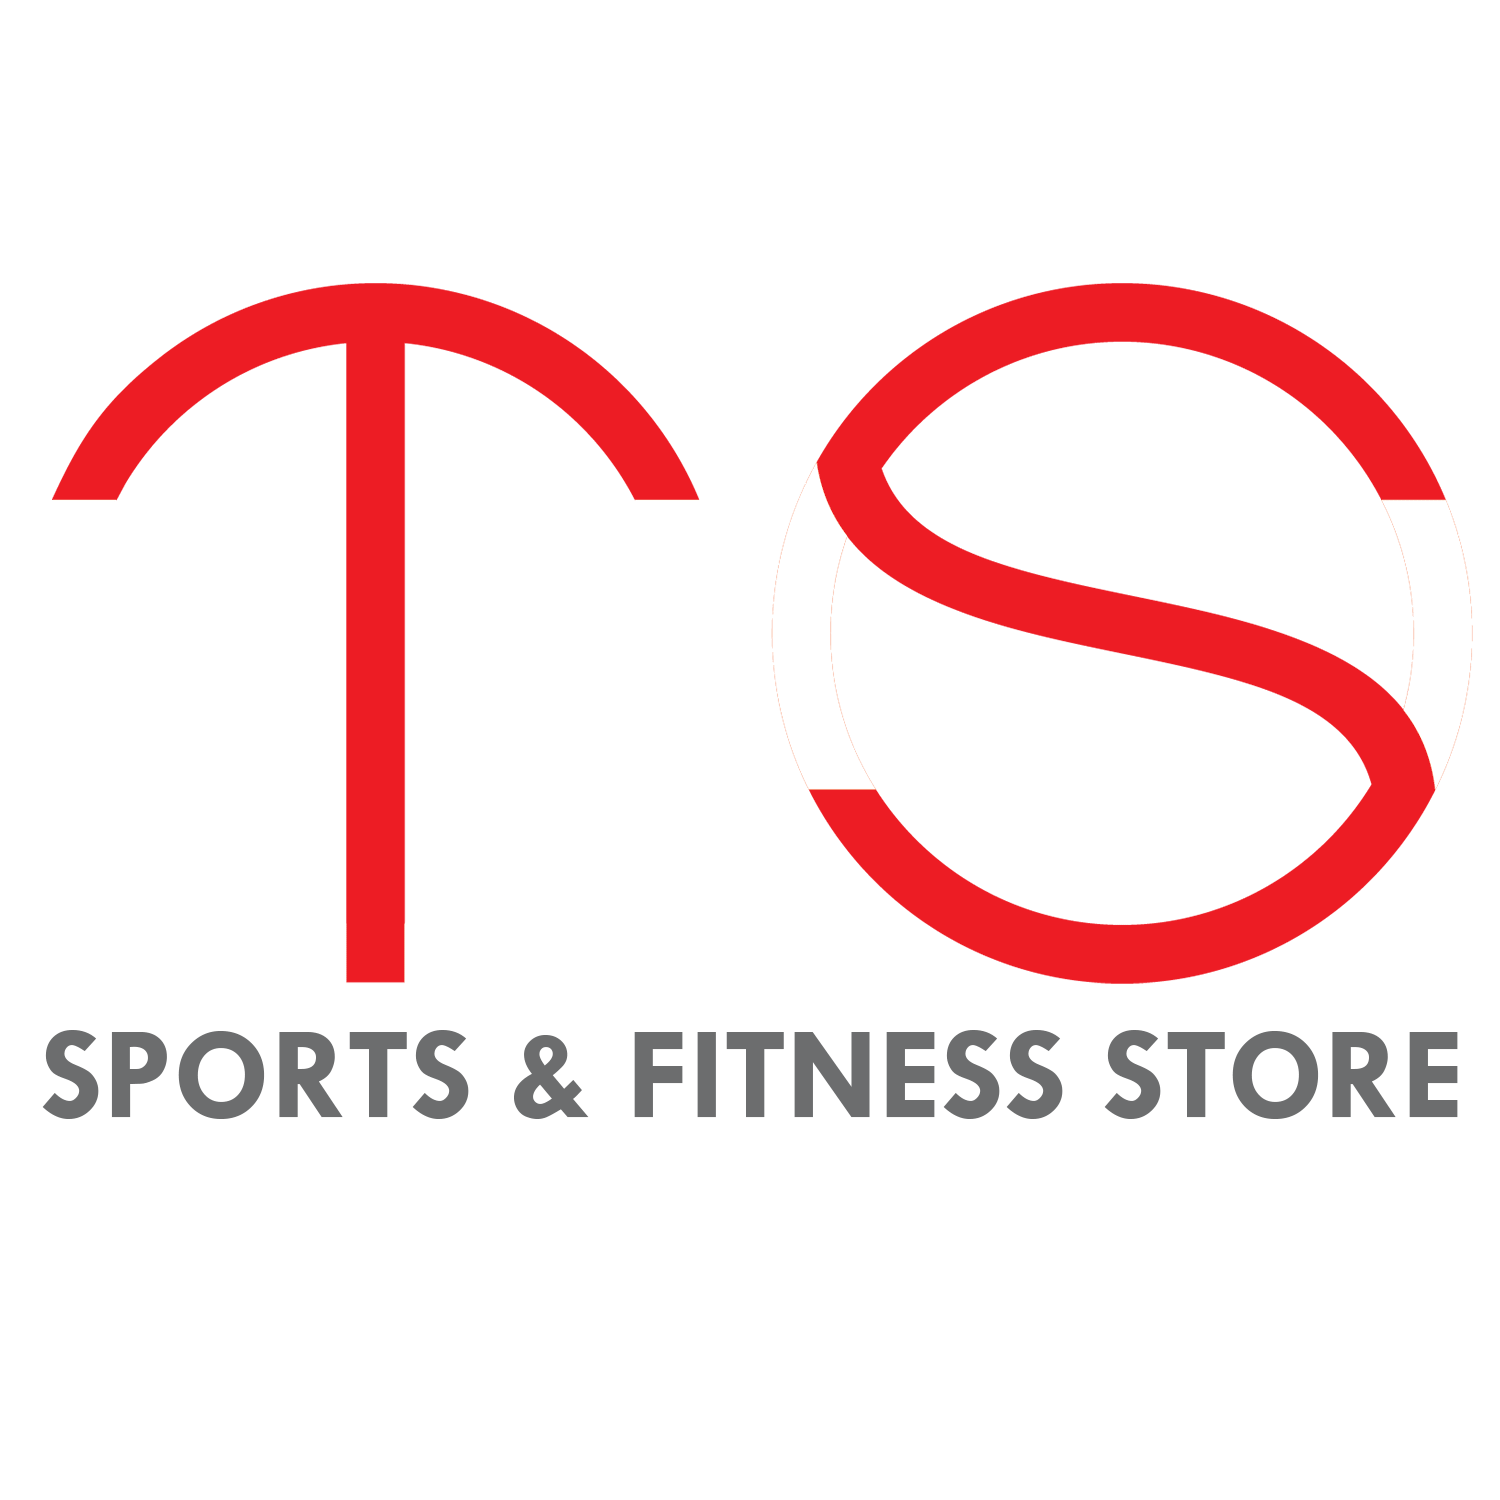 Best Sports & Fitness Store in Hyderabad